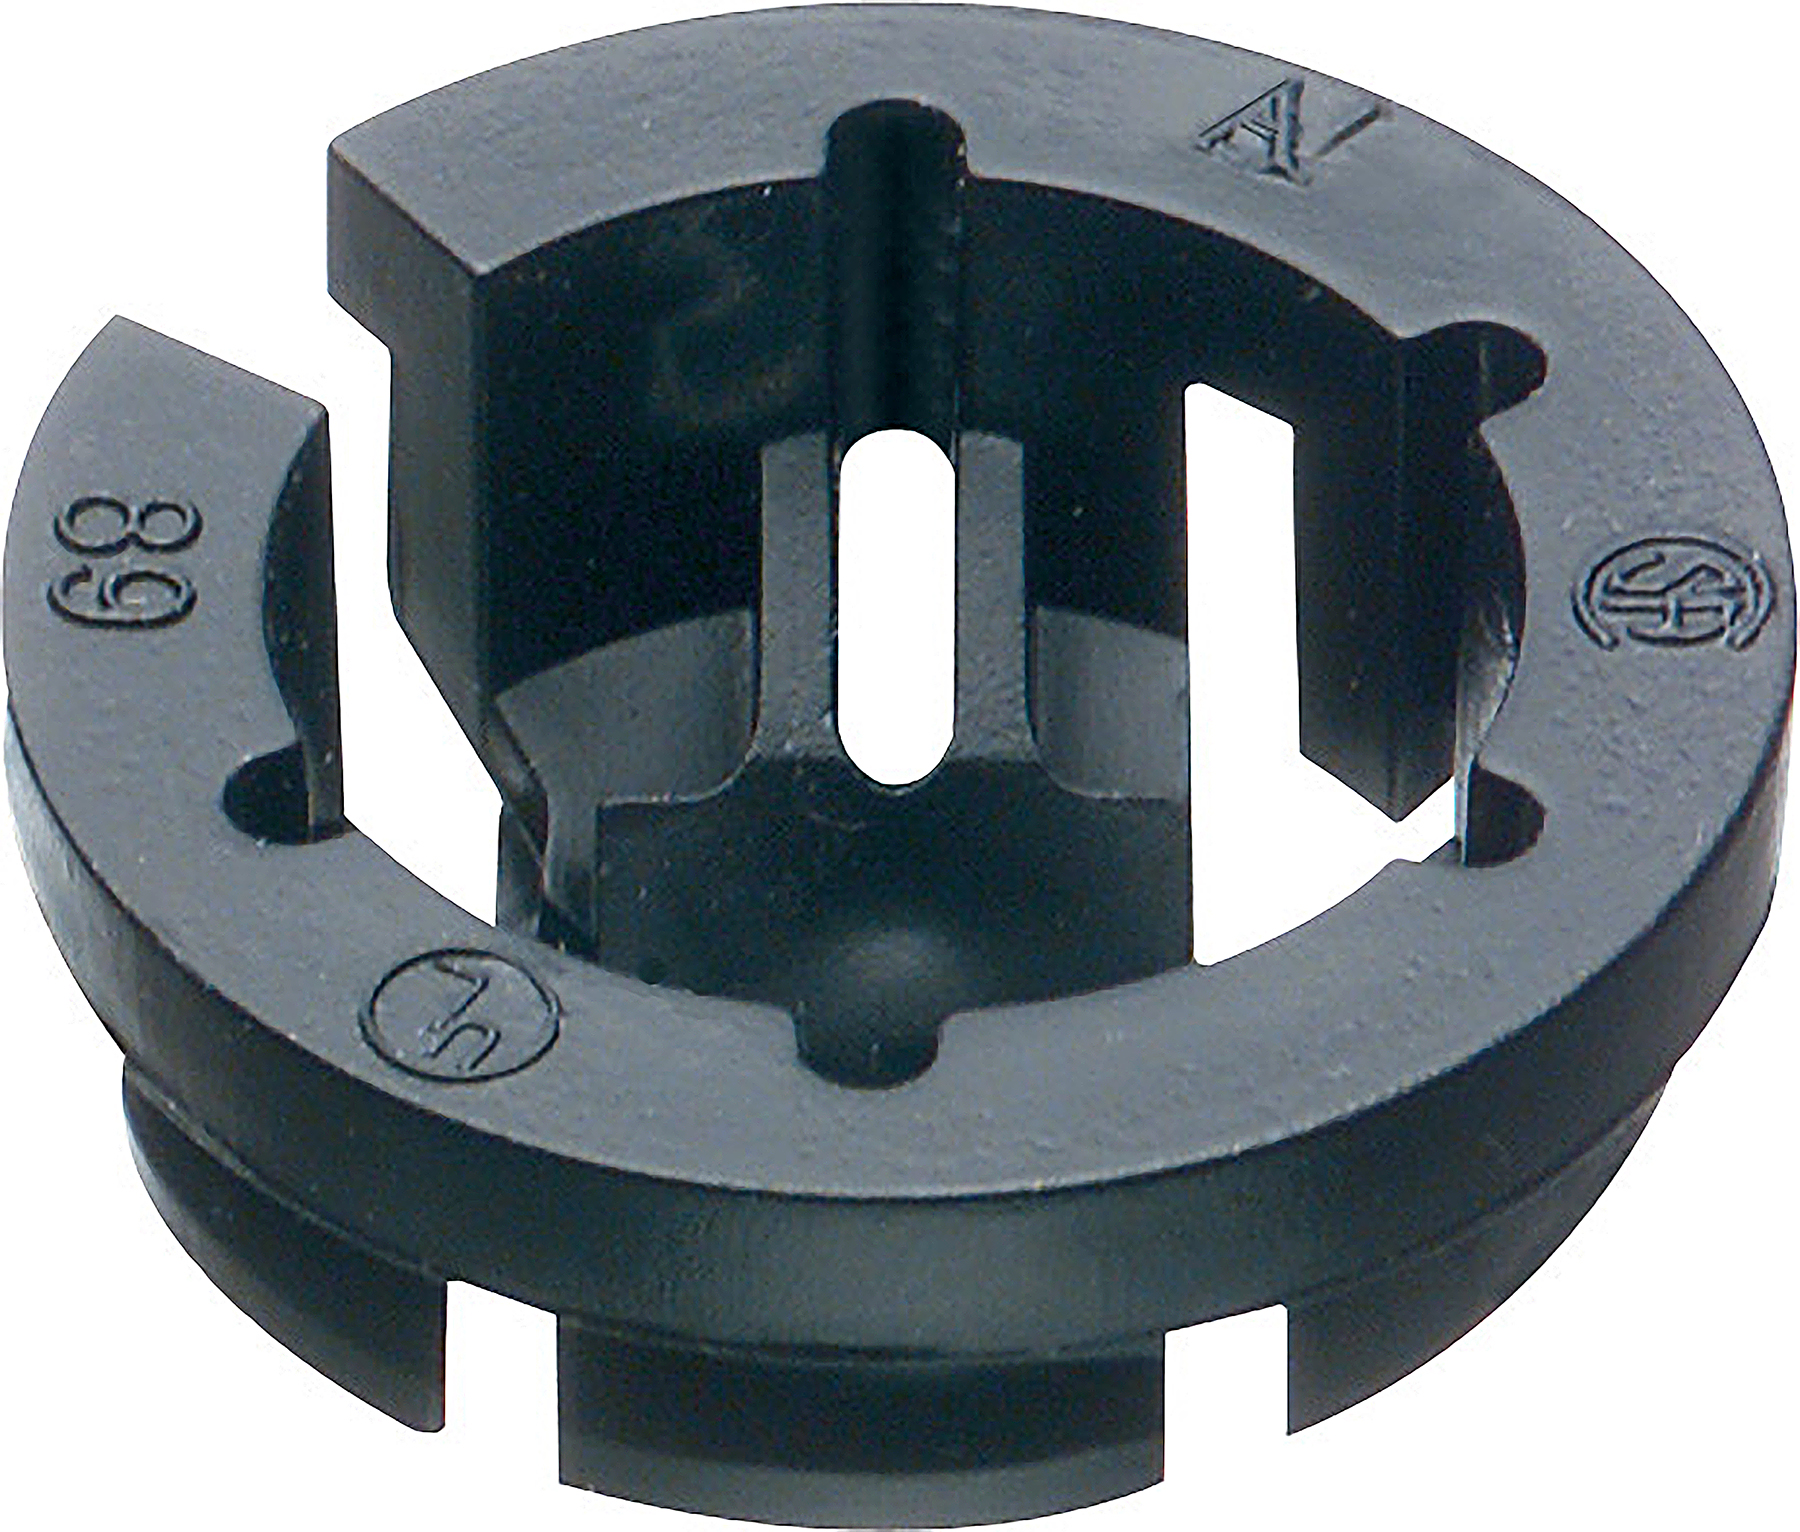 NM94 BLACK BUTTON BUSHING 1/2 - Conduit and Fittings